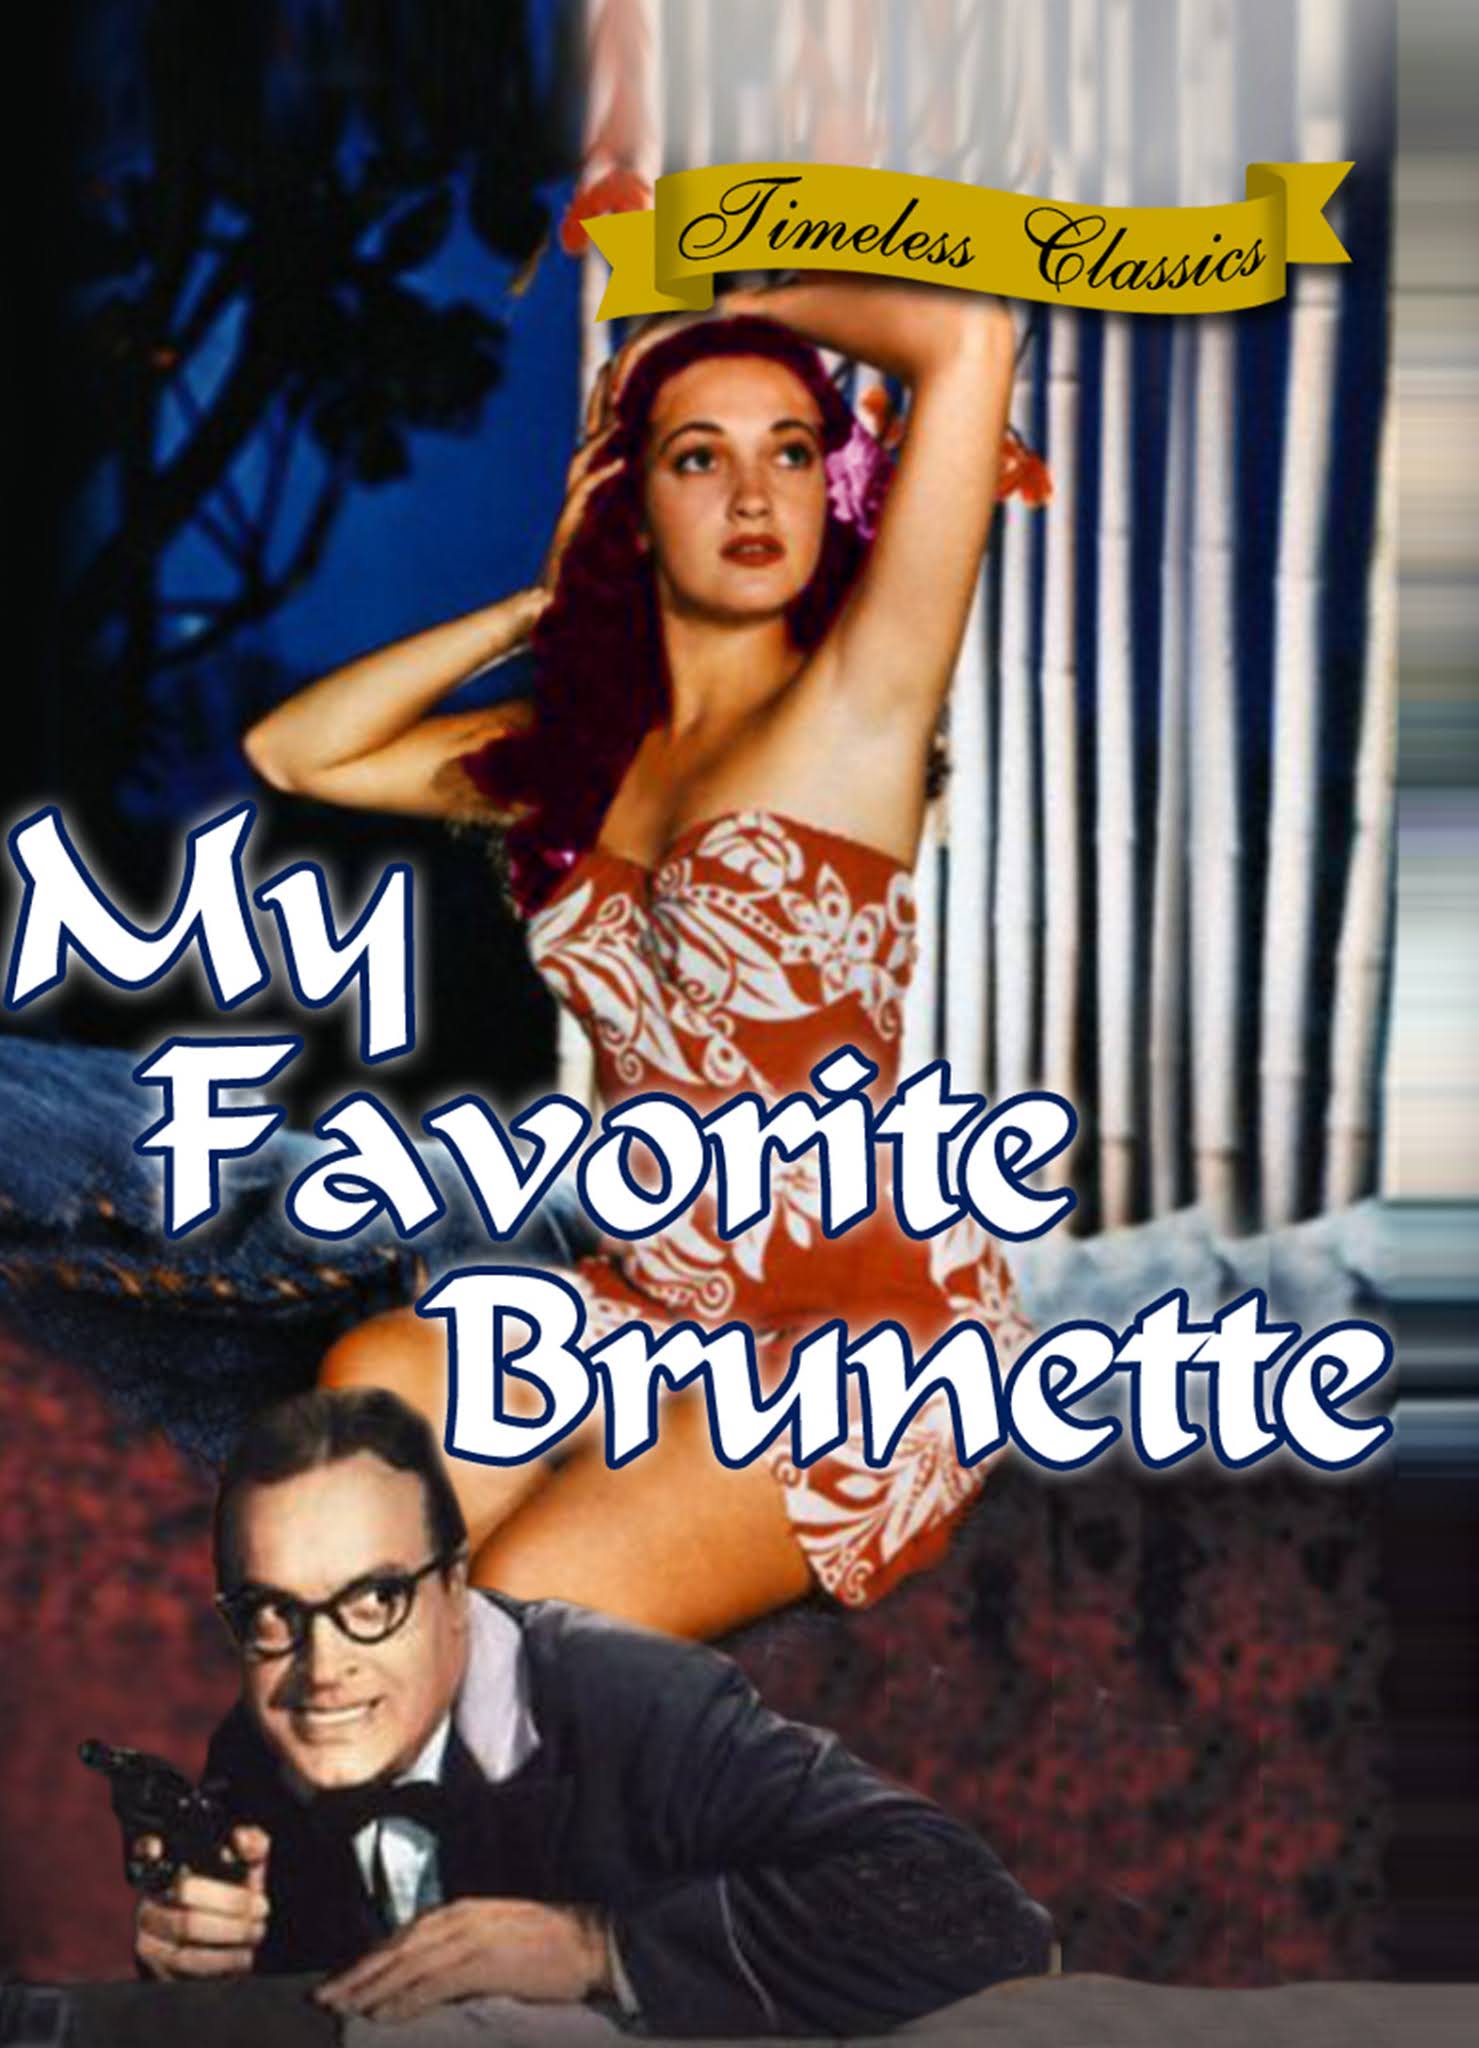 movie review my favorite brunette